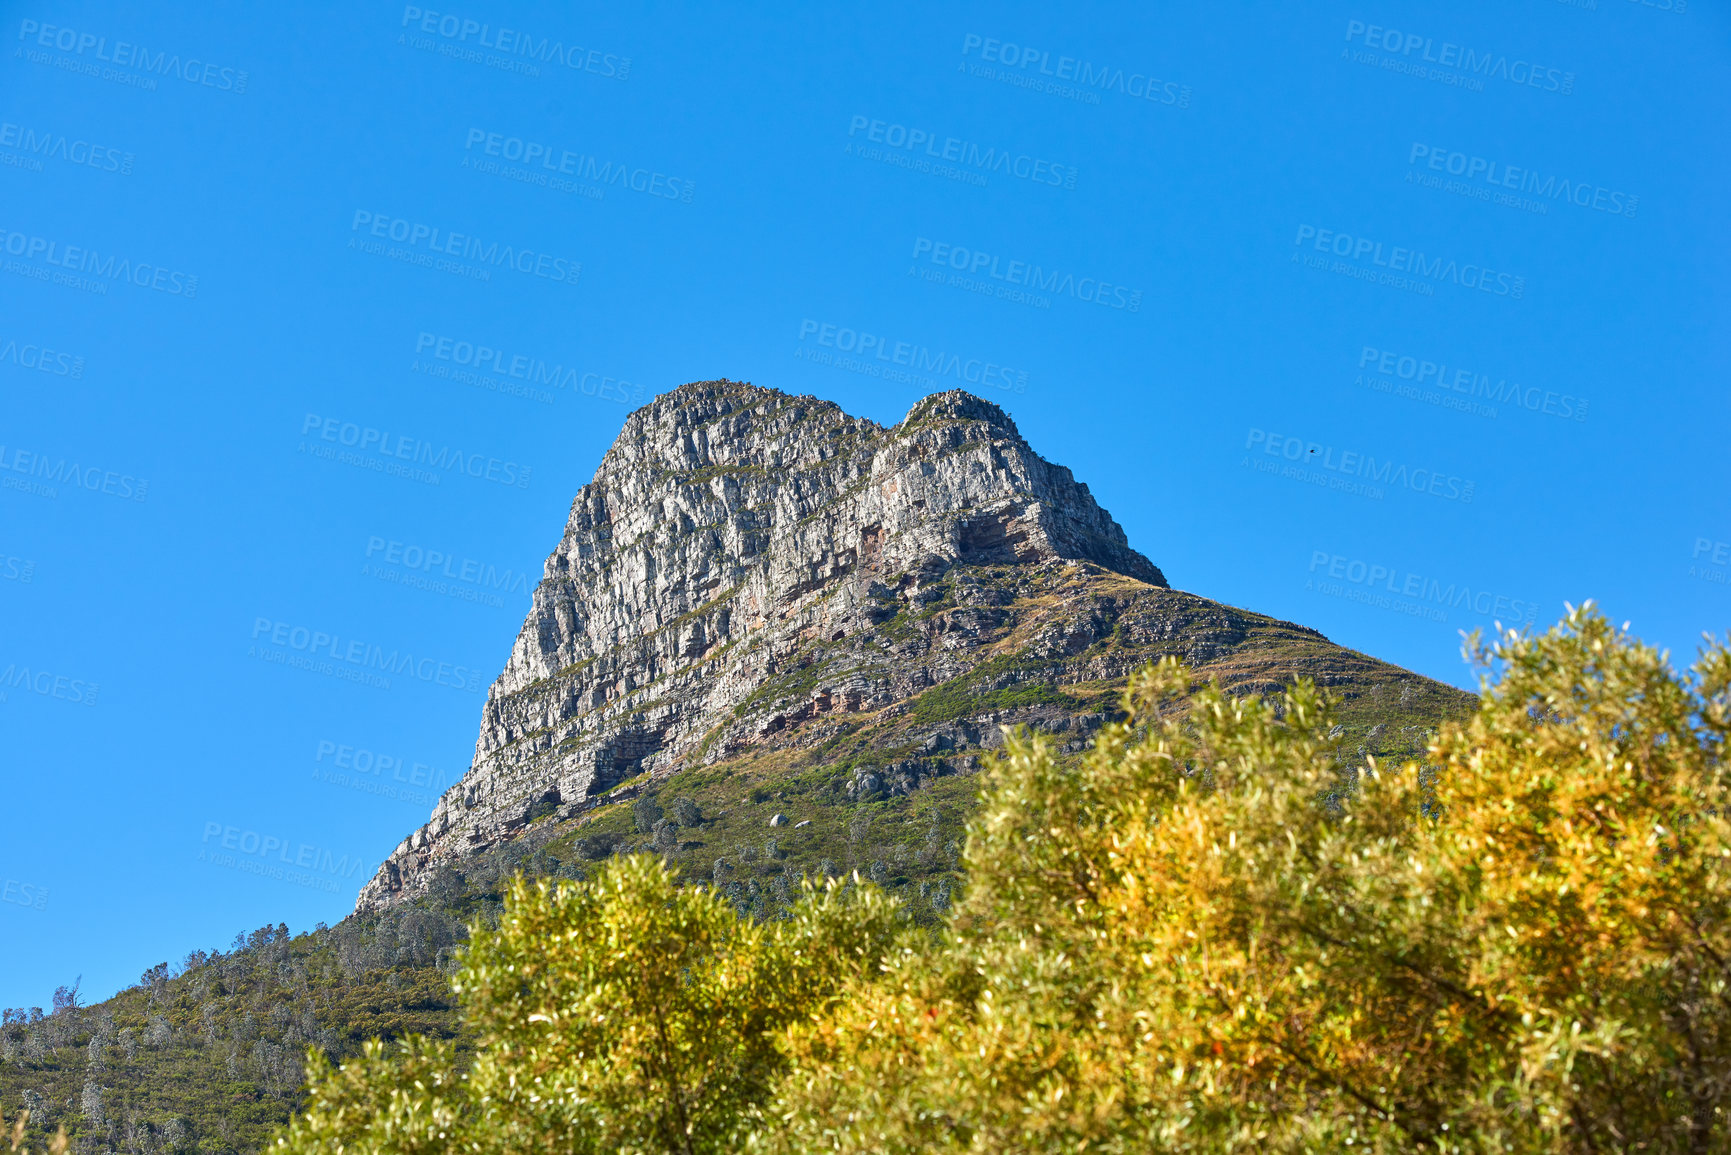 Buy stock photo Landscape of mountain on a blue sky with copy space. Rock outcrops on a beautiful sunny day. Lions Head mountains peak with green trees and bushes, a popular landmark in Cape Town, South Africa